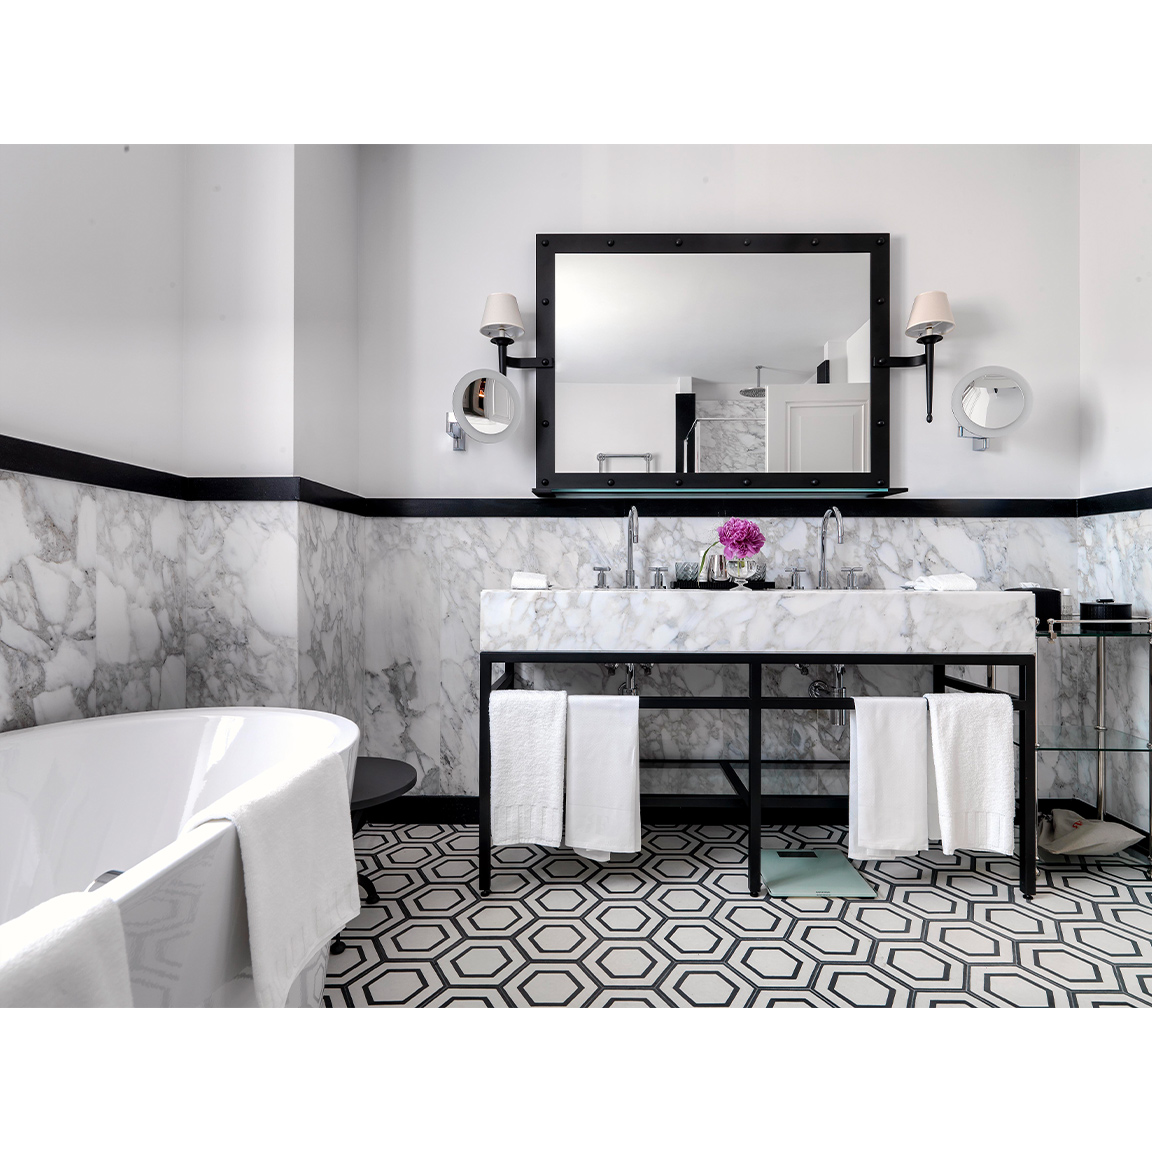 marble bathroom with black and white optical floor tiles